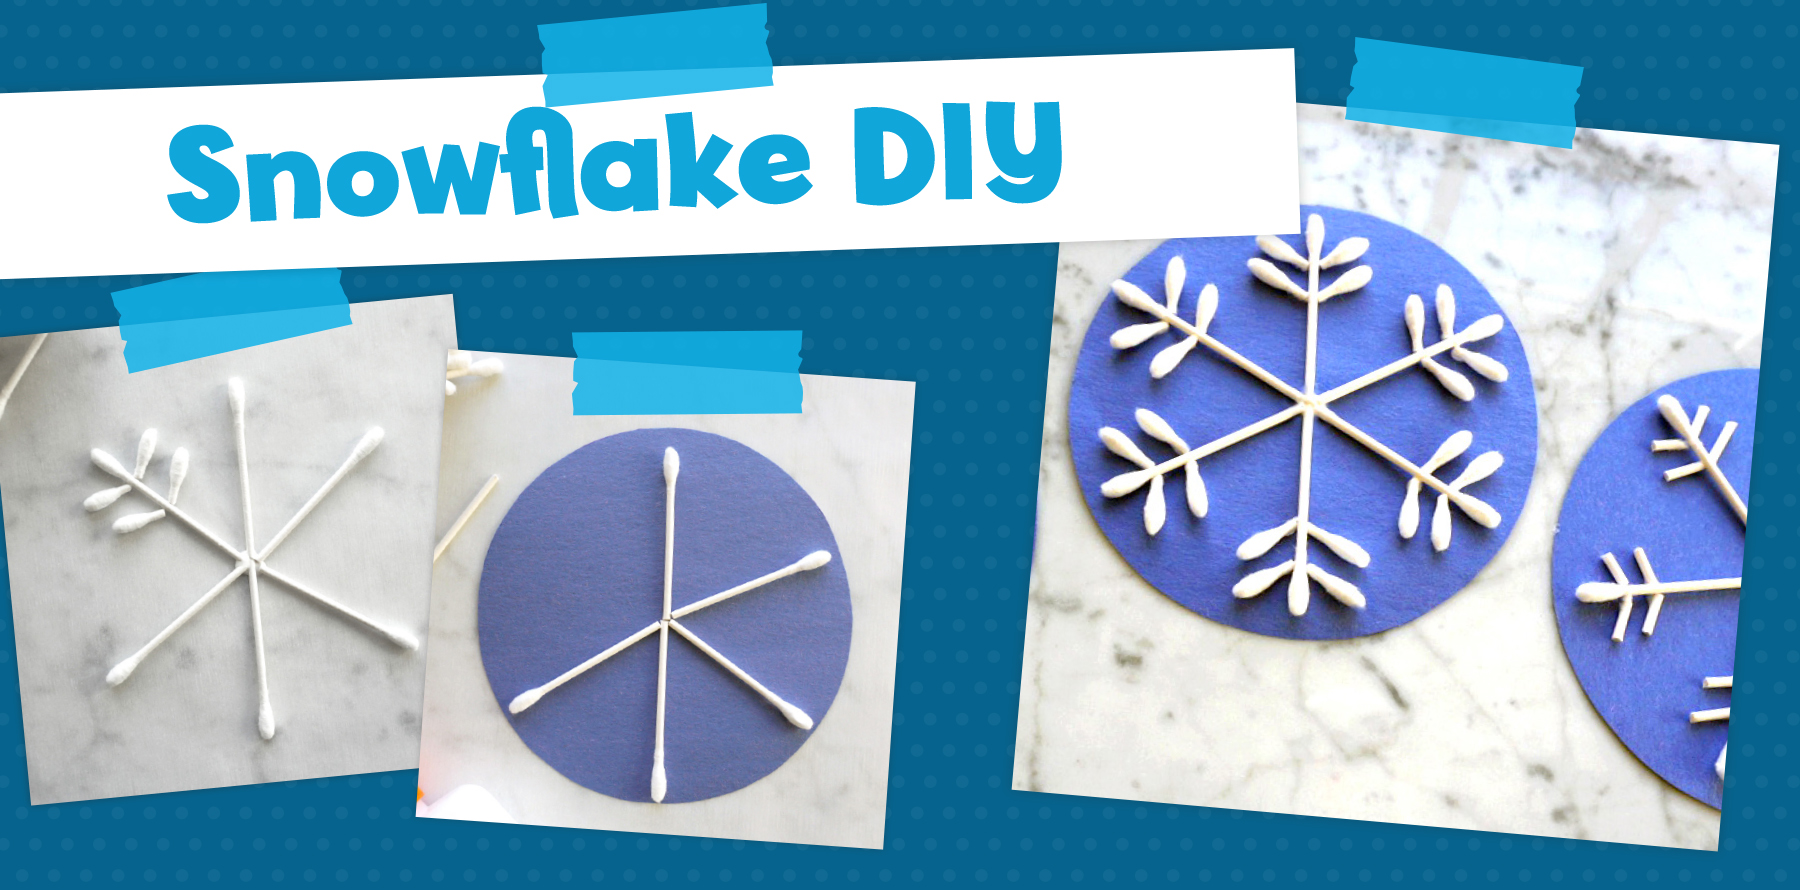 Q-tip Snowflake - The Best Ideas for Kids